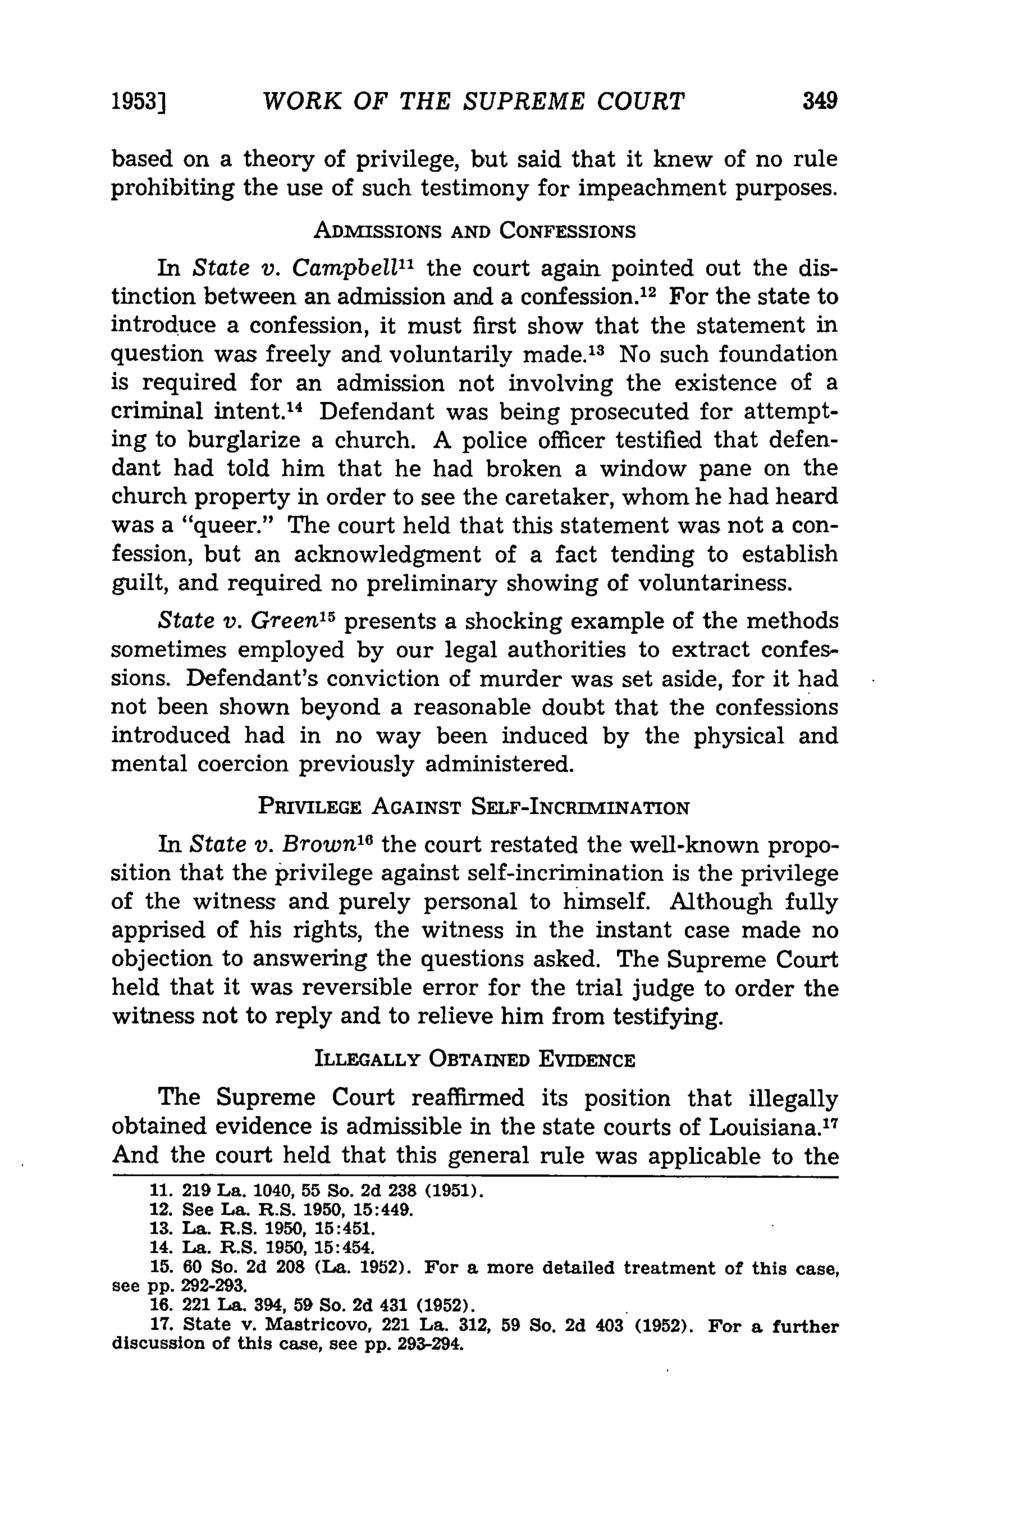 1953] WORK OF THE SUPREME COURT based on a theory of privilege, but said that it knew of no rule prohibiting the use of such testimony for impeachment purposes. ADMISSIONS AND CONFESSIONS In State v.